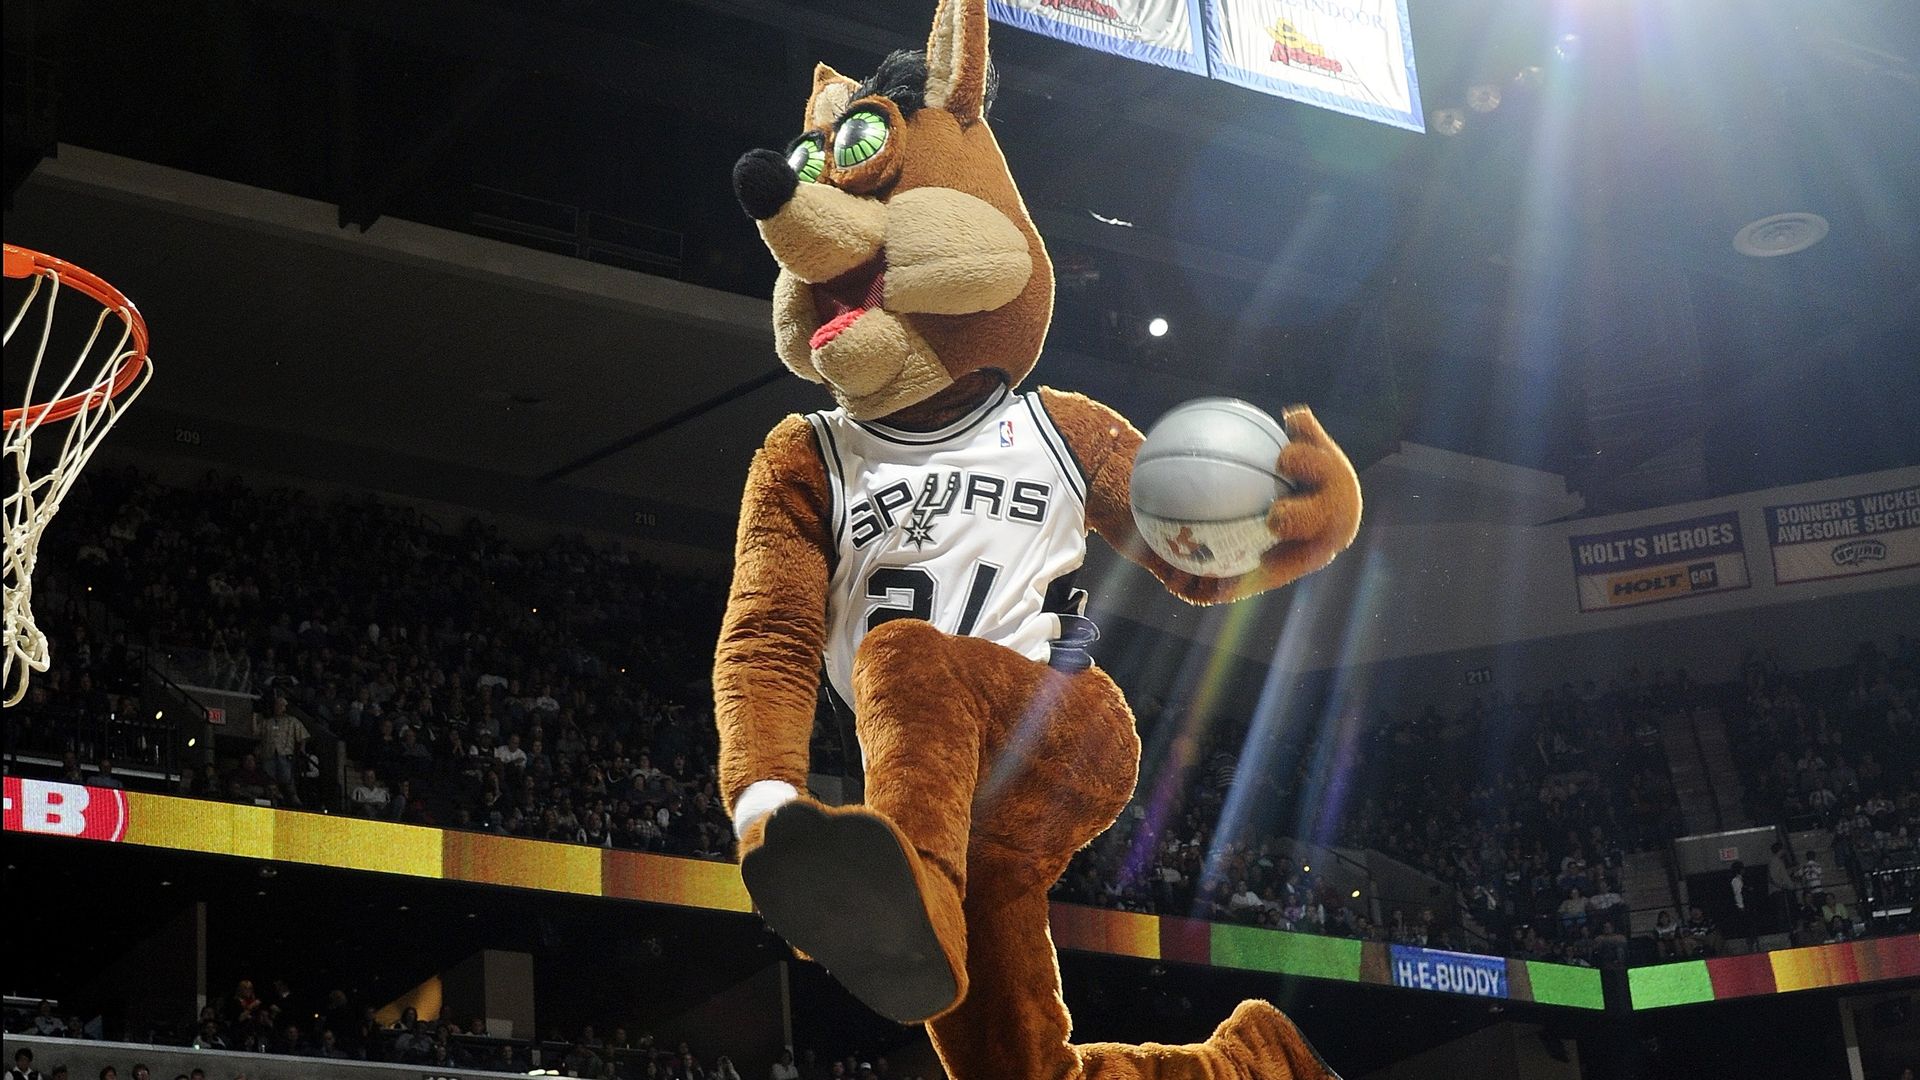 Coyote, the Spurs' mascot, prepares to dunk.